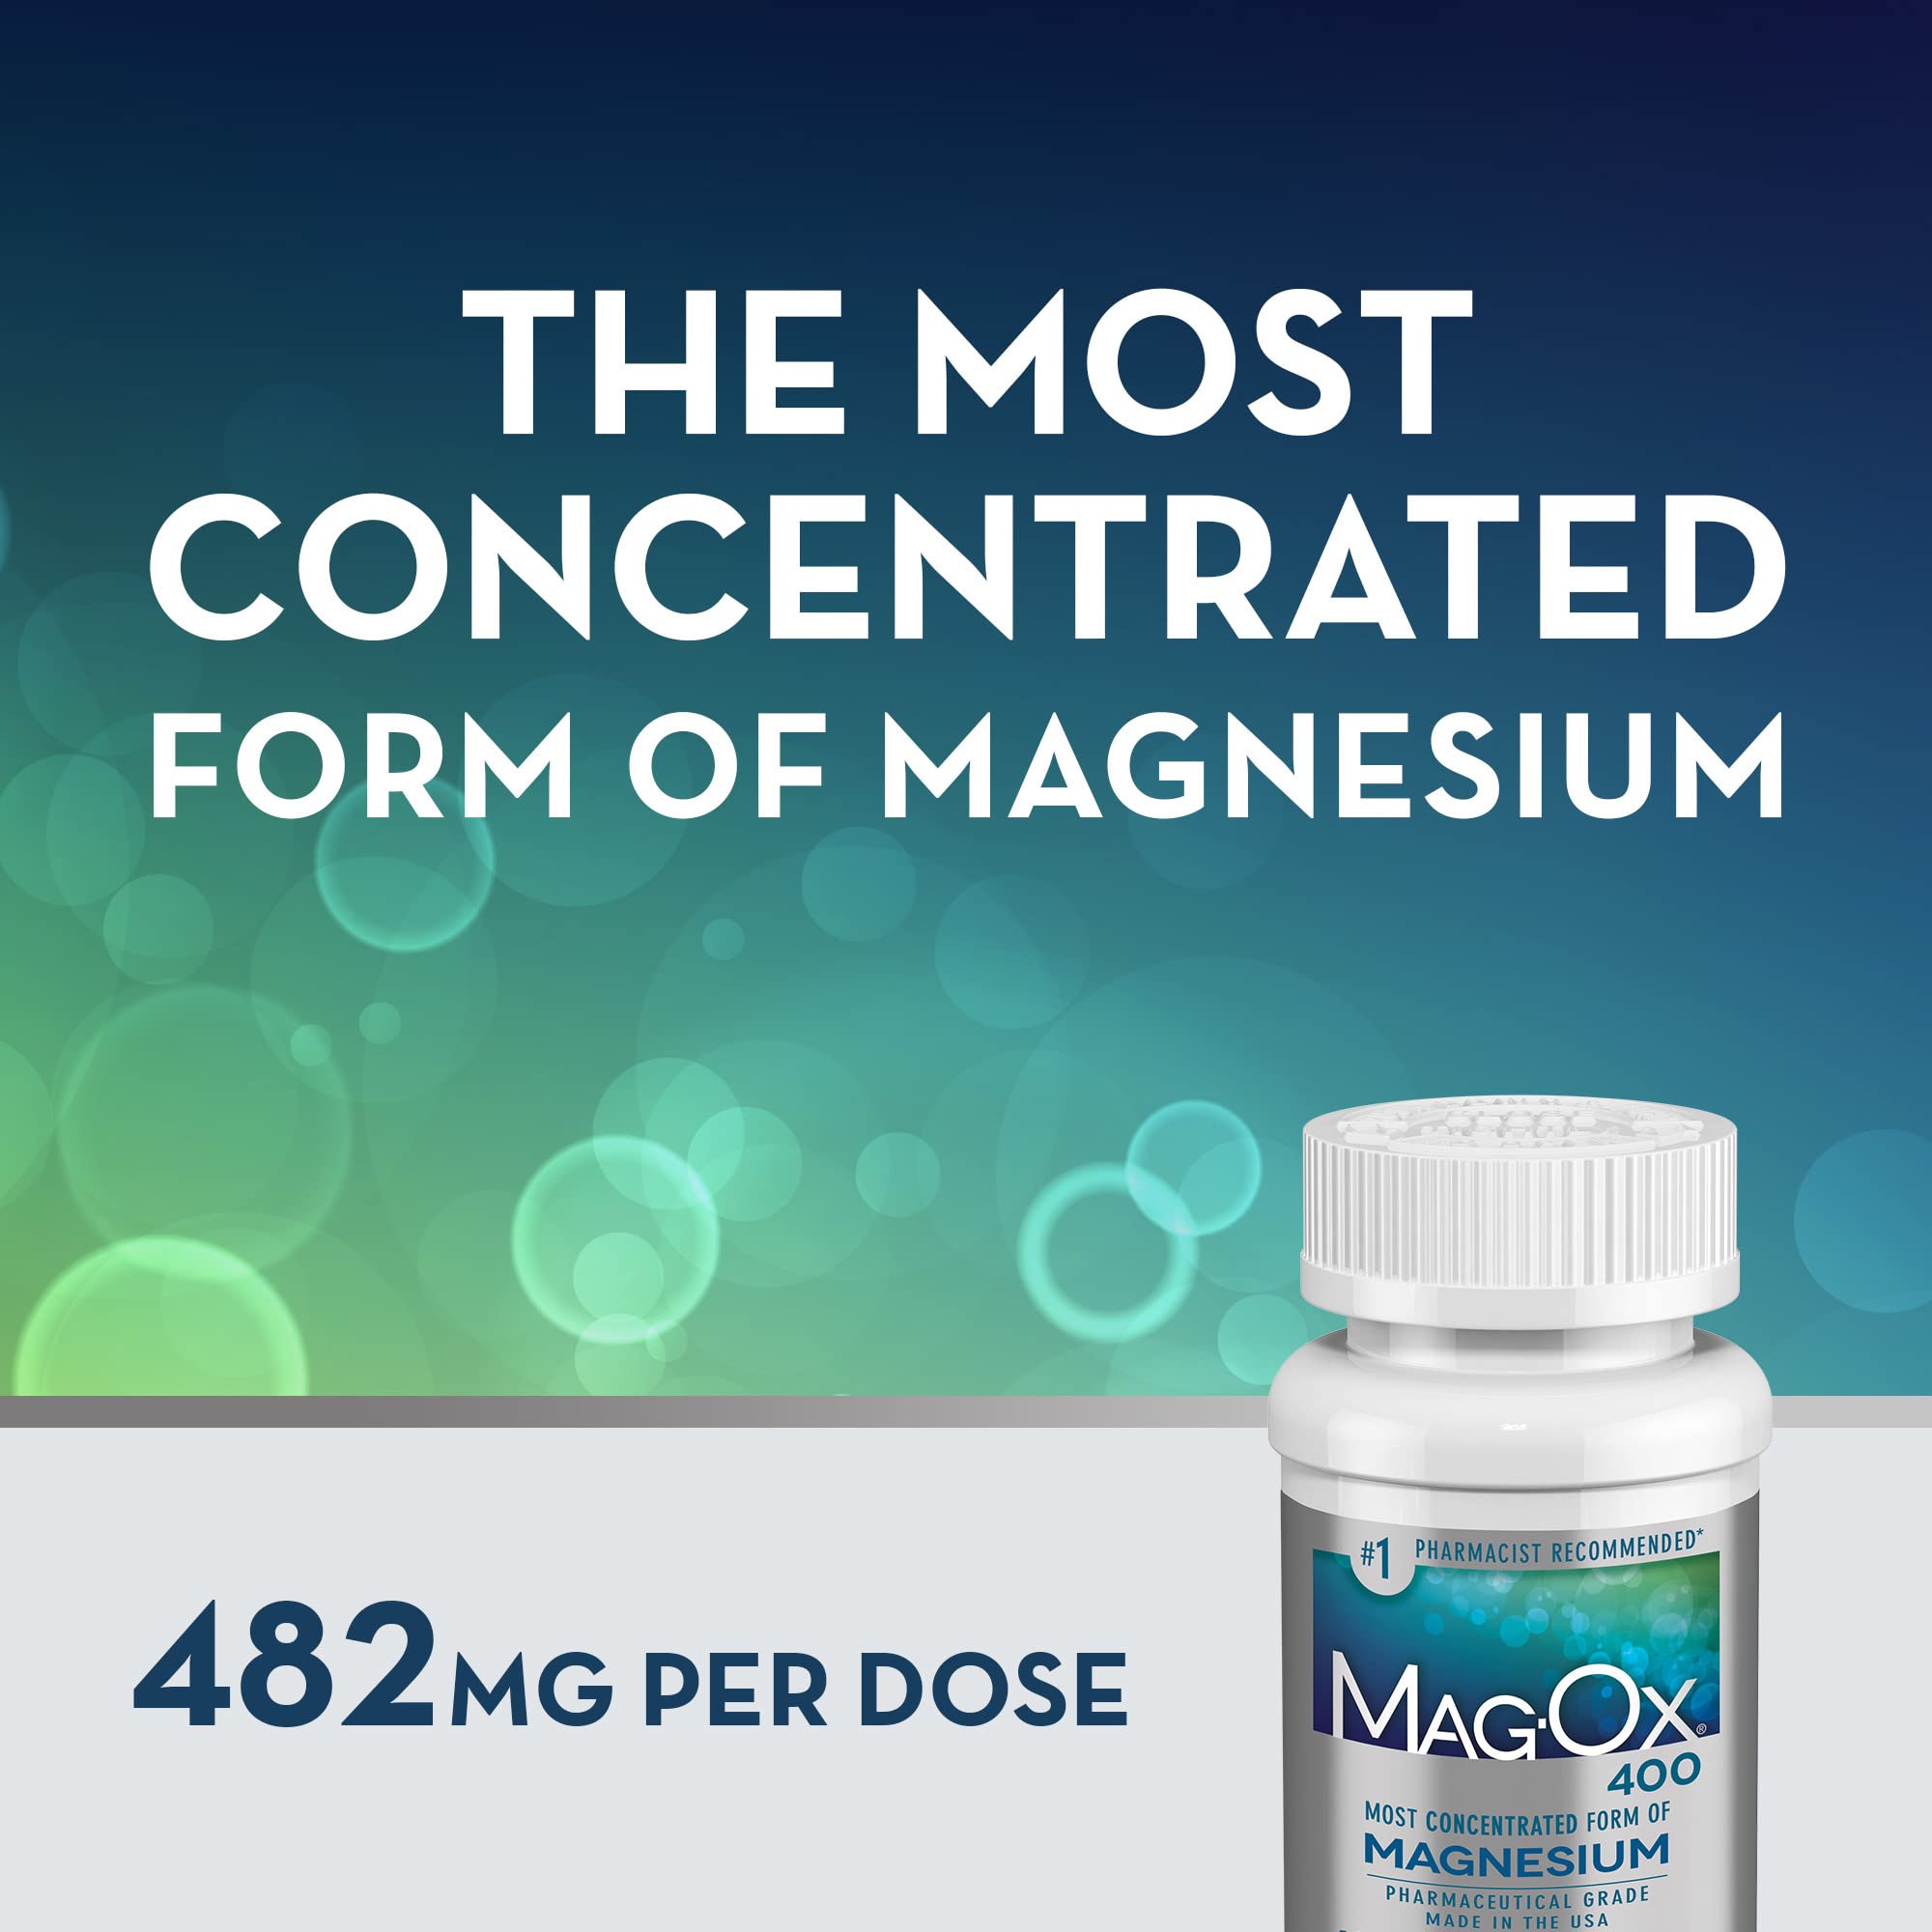 Mag-Ox 400 Magnesium Supplement, Pharmaceutical Grade Magnesium Oxide & Life Extension Neuro-mag Magnesium L-threonate, Magnesium L-threonate, Brain Health, Memory & Attention